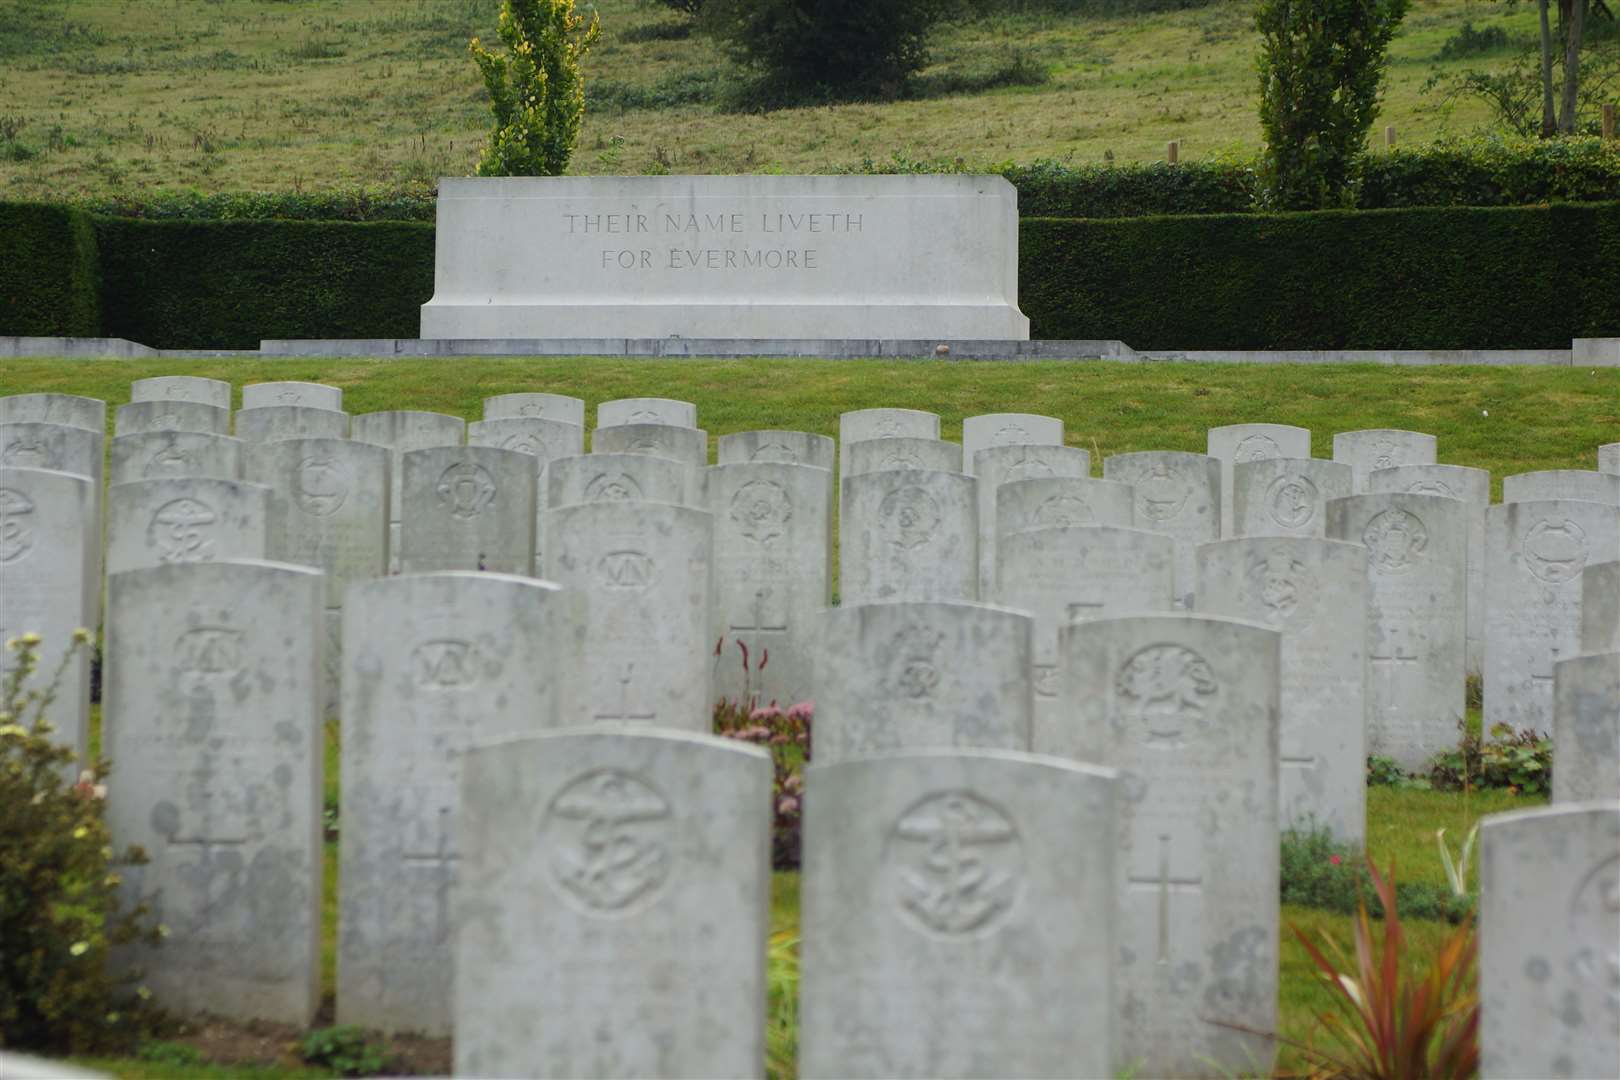 The white stone war graves remember those who lost their lives at war. Picture Commonwealth War Graves Commission